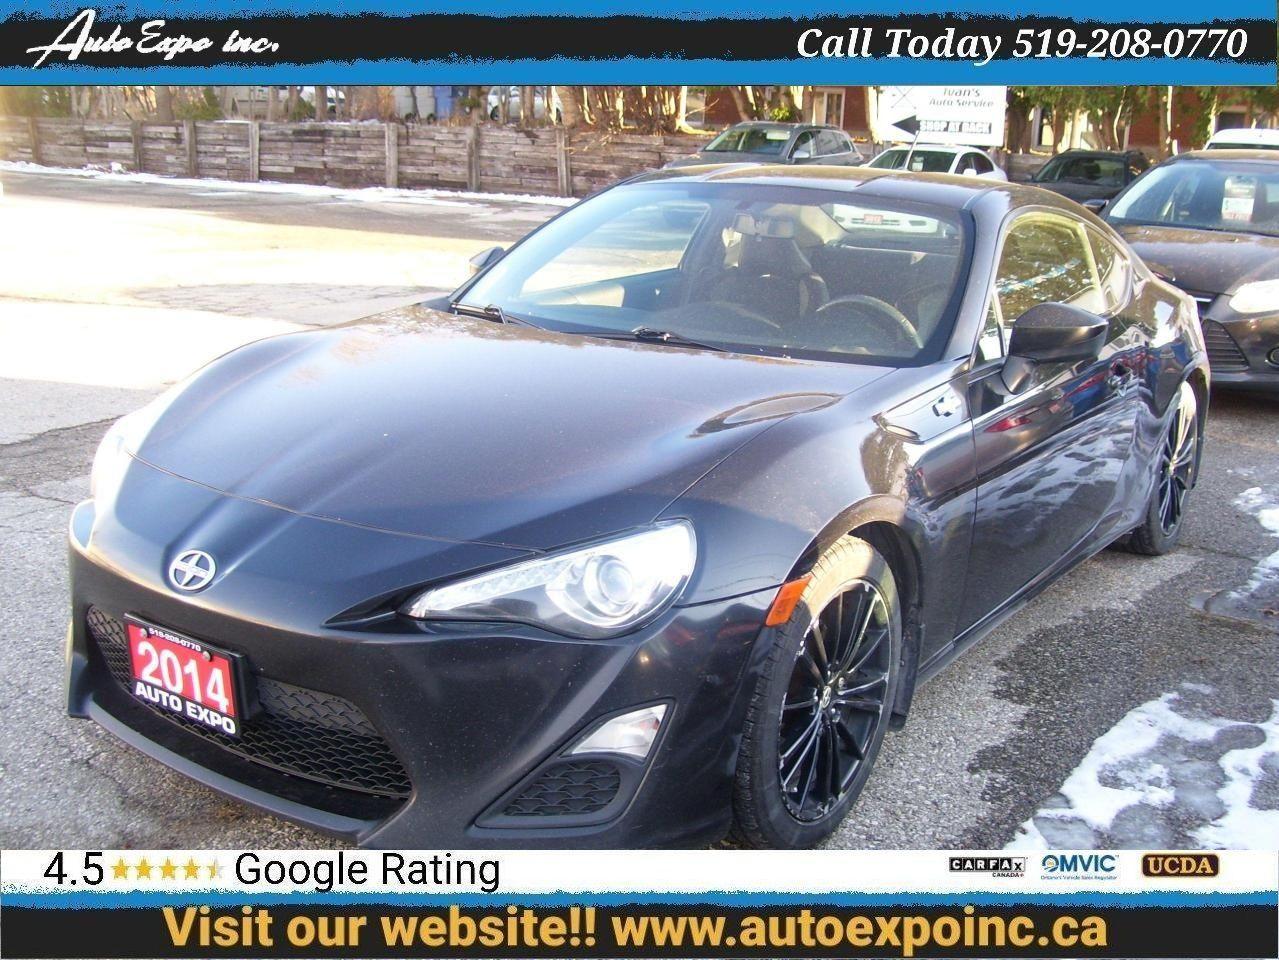 2014 Scion FR-S 6 Speed,Alloys,Certified,Clean CarFax,Bluetooth,,, - Photo #1